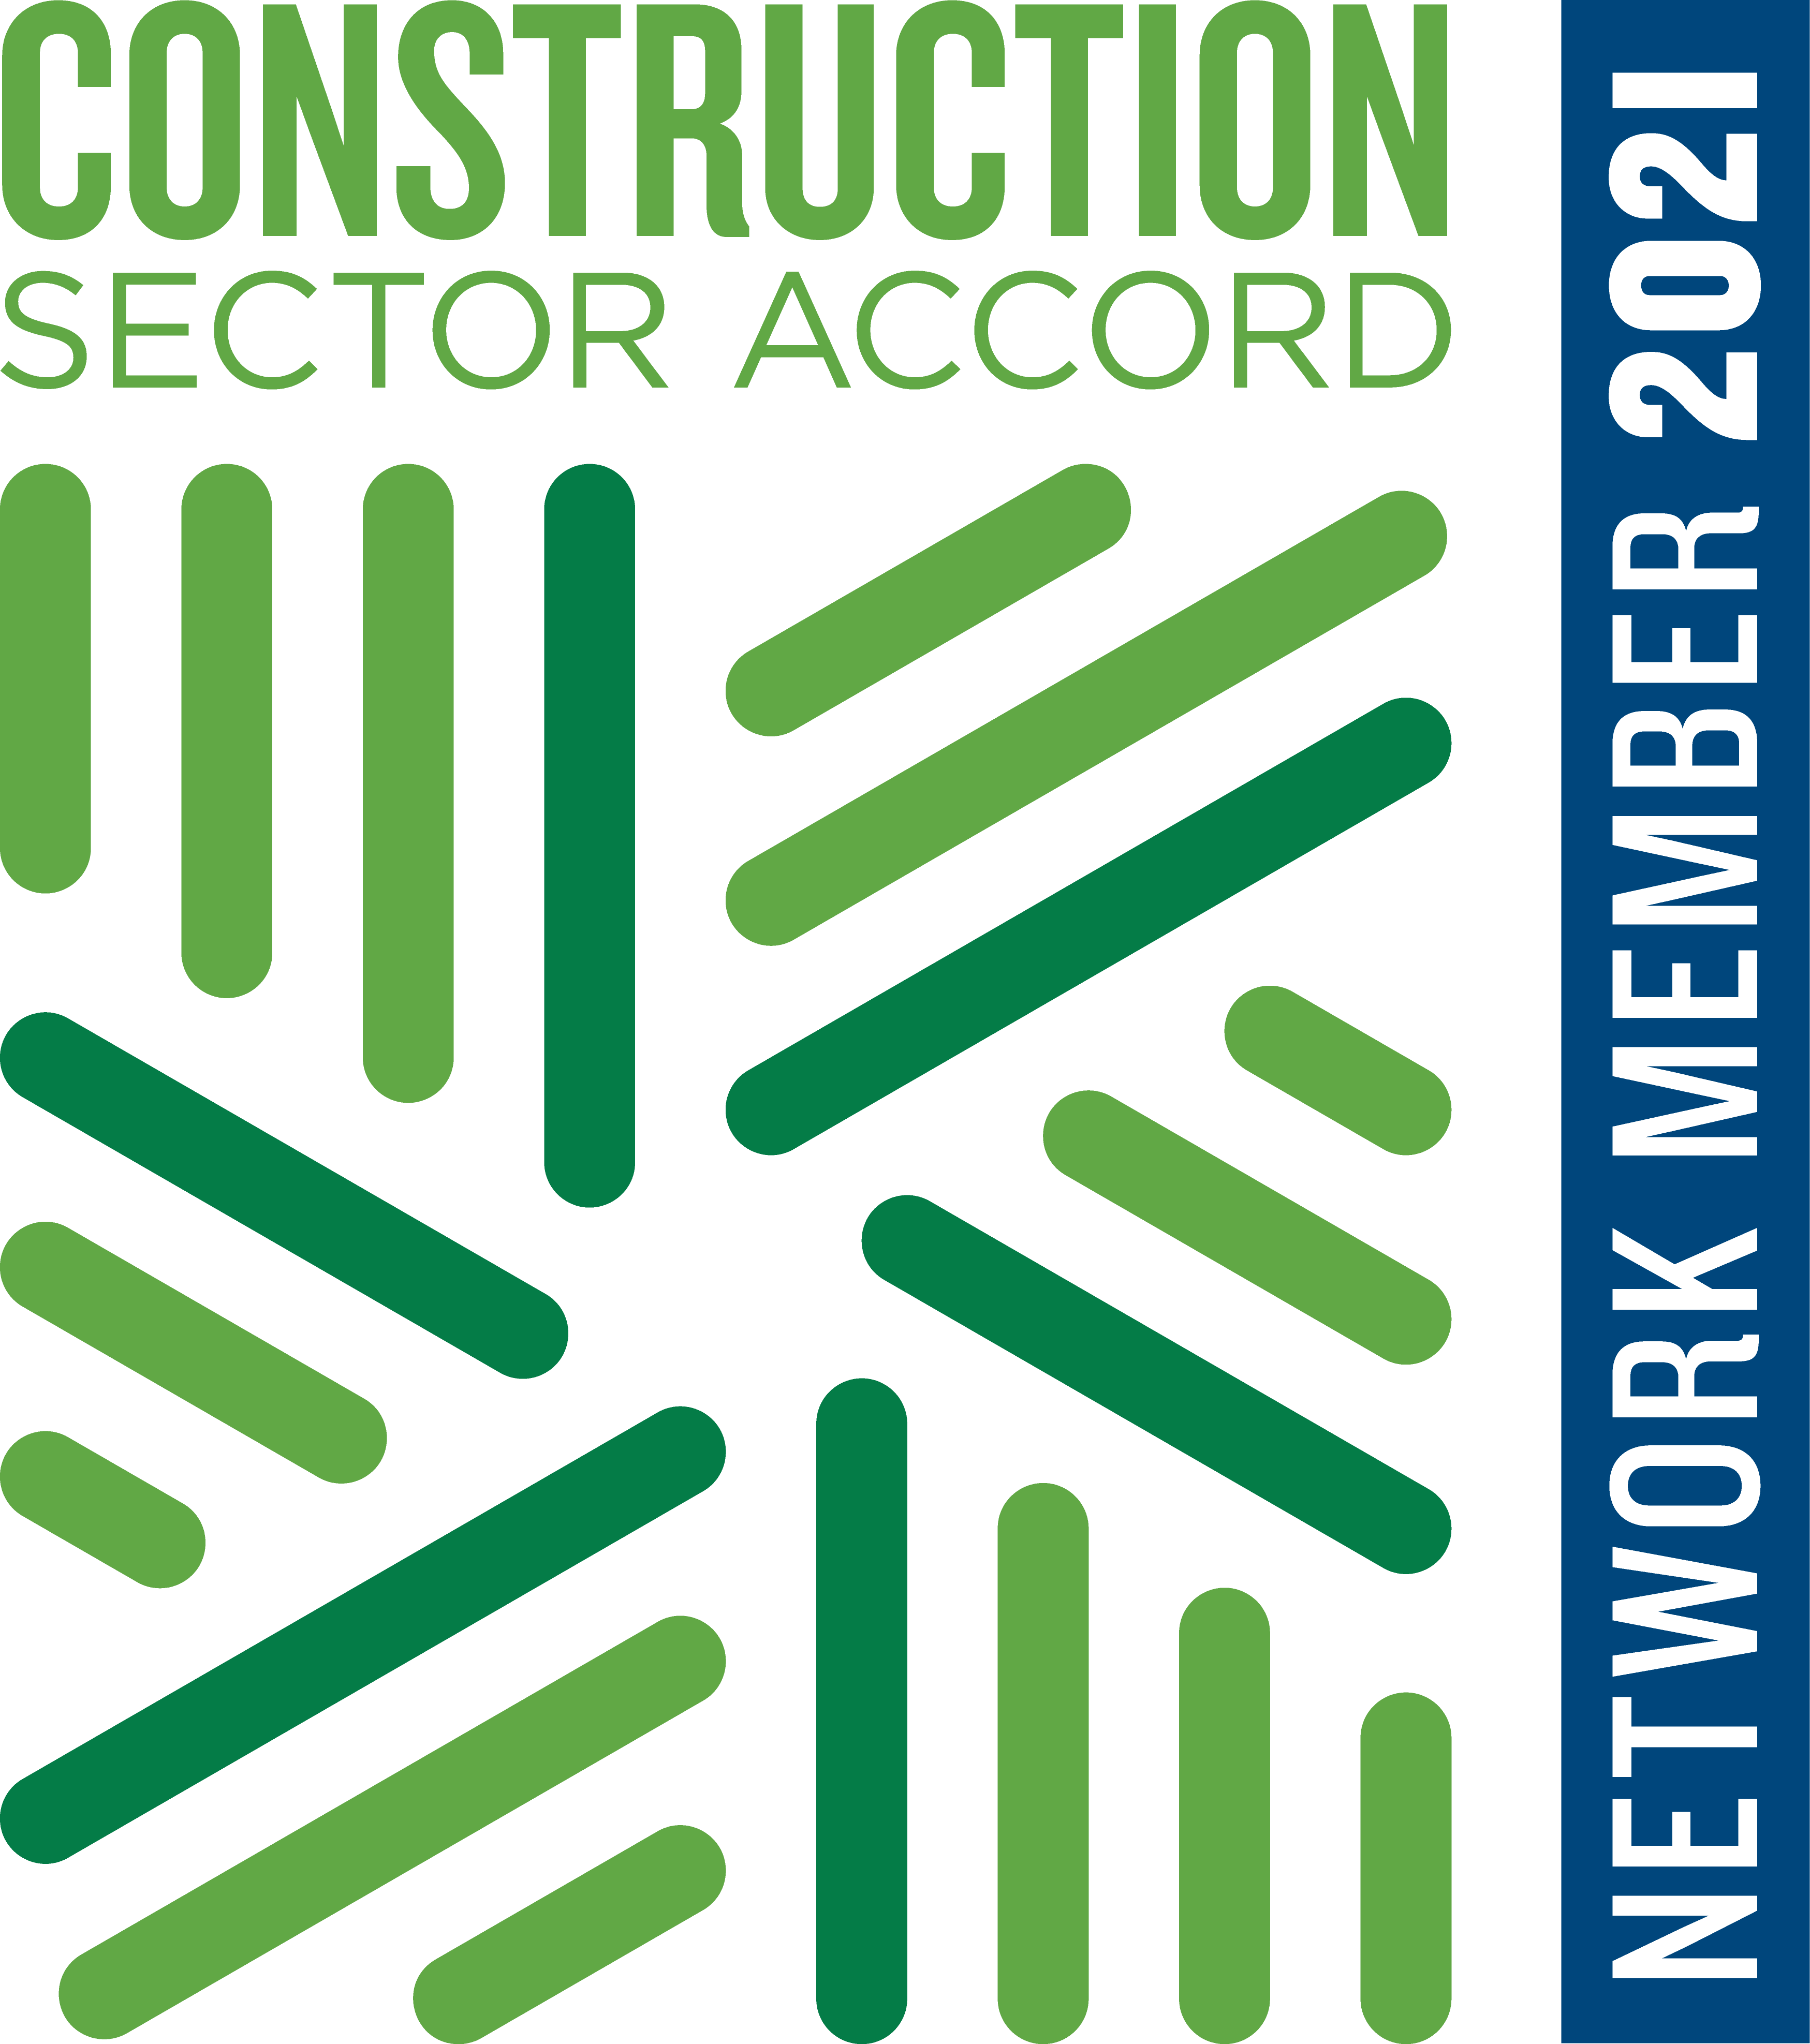 Construction Sector Accord Network Member 2021 Badge